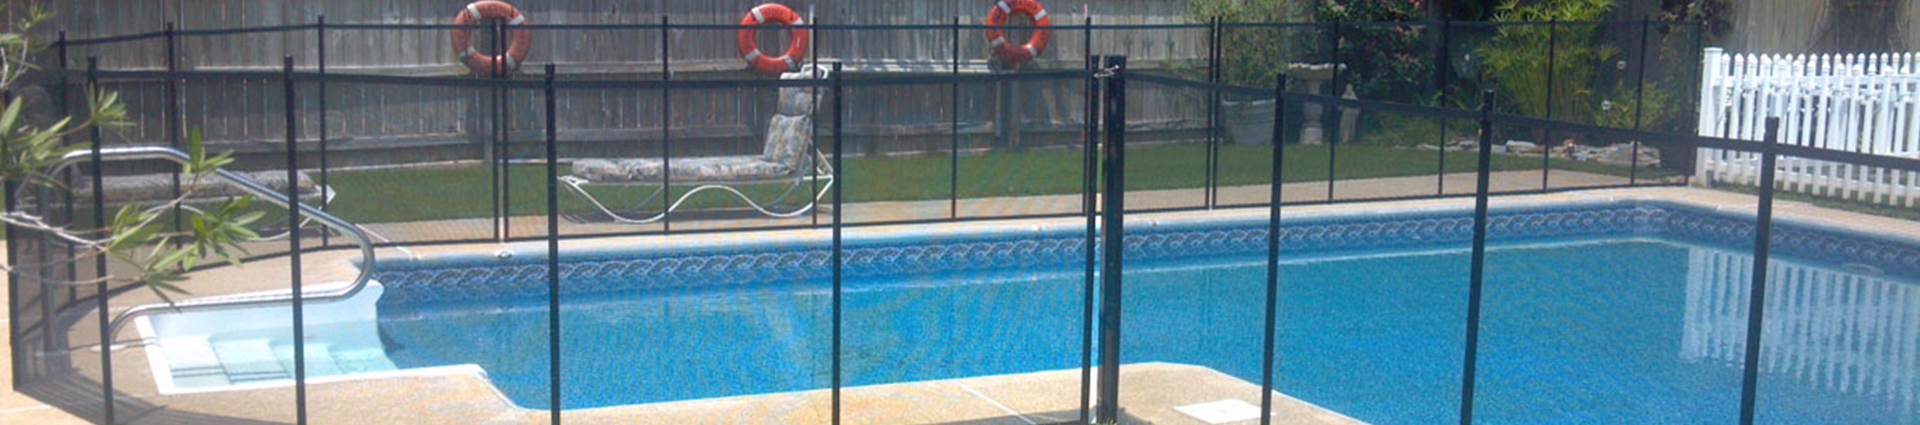 swimming pool with fence and sunbed